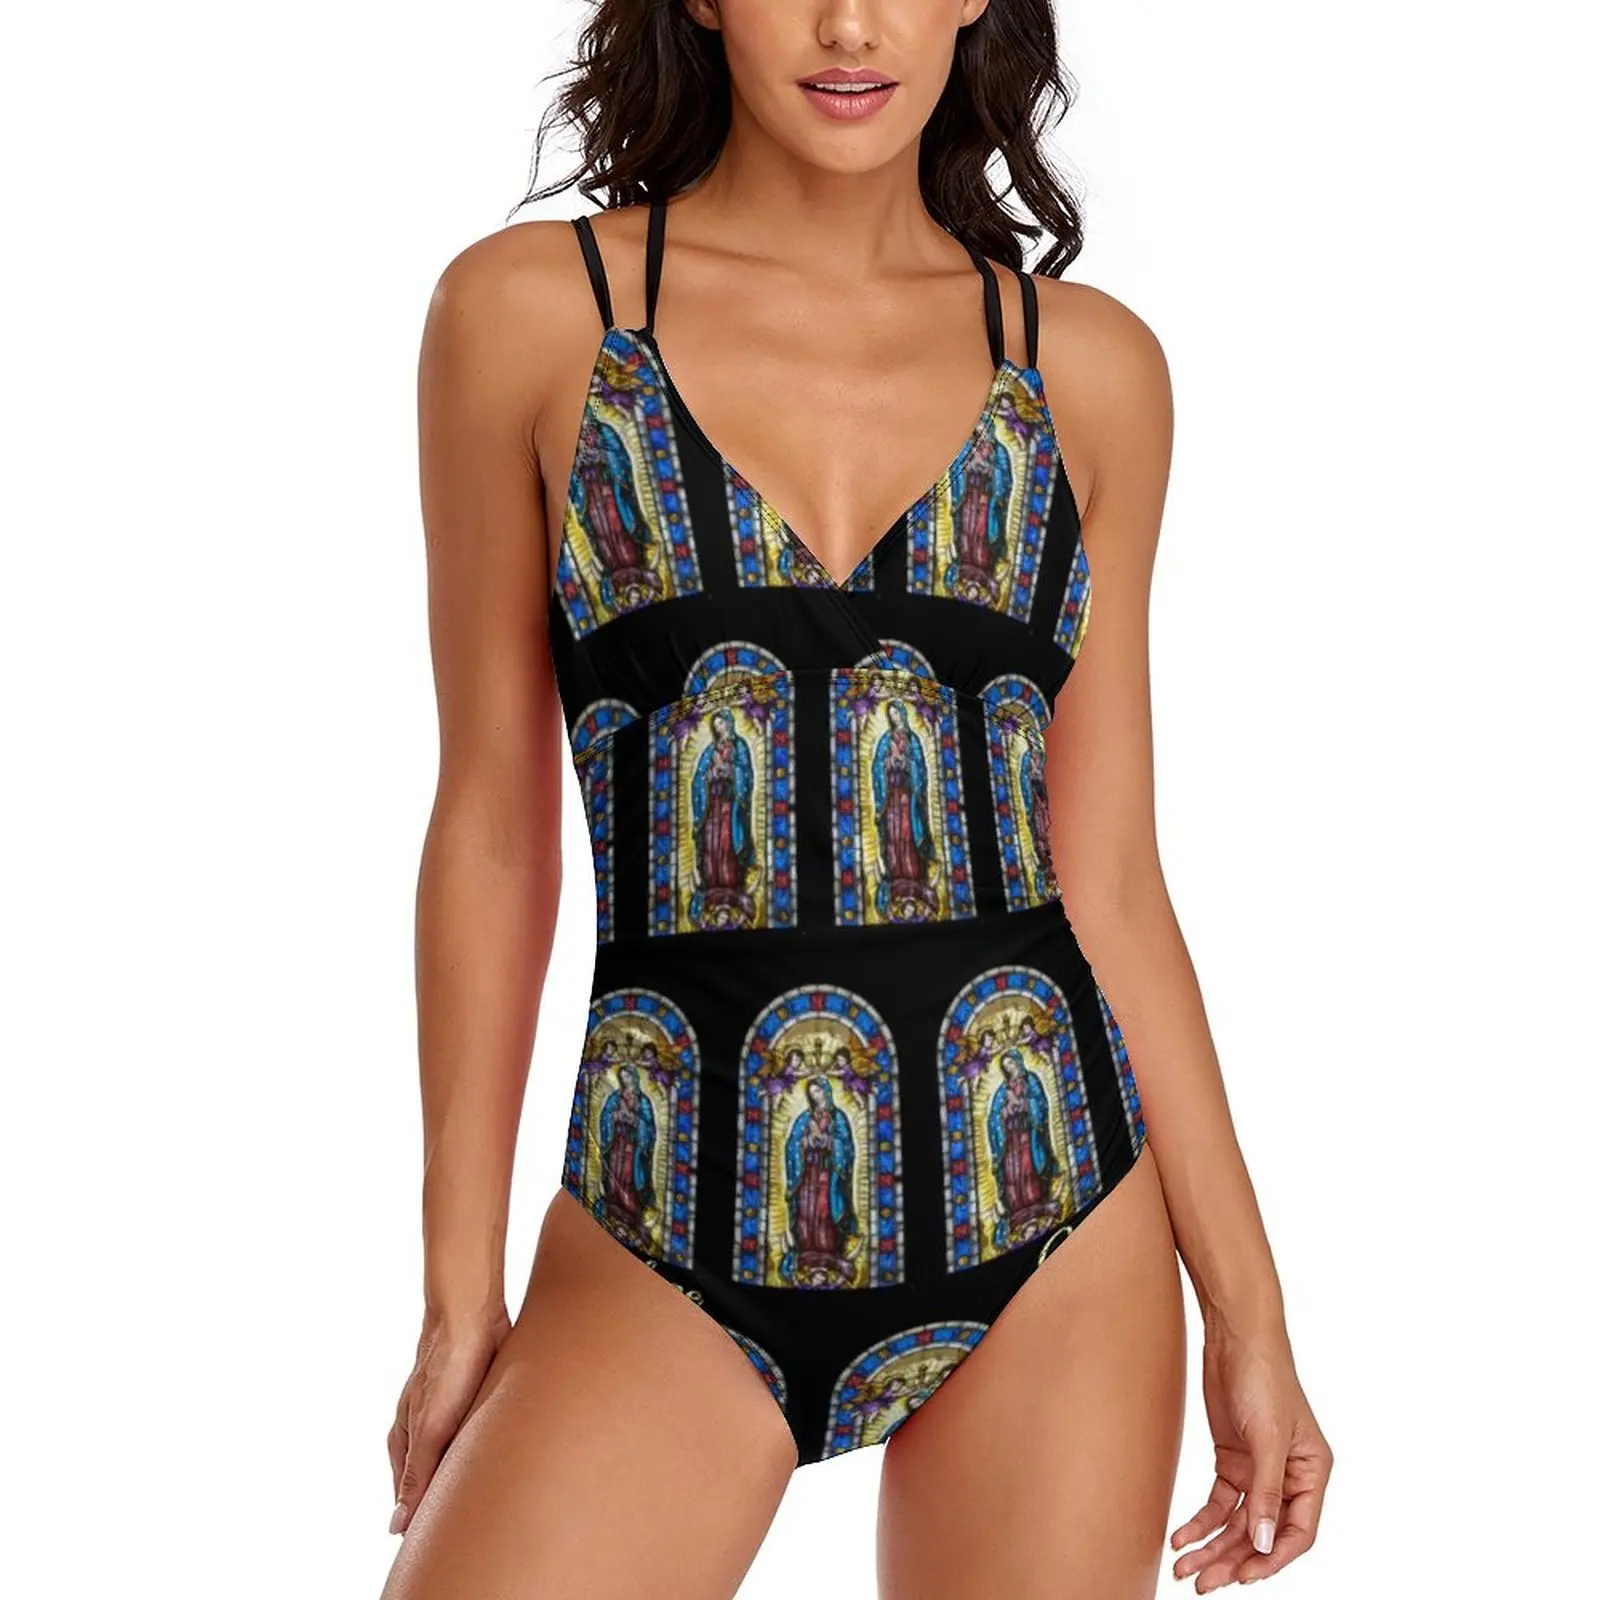 

Our Lady of Guadalupe Swimsuit Virgin Mary Swimwear One Piece Swimsuits Surf Push Up Graphic Bathing Suits Beachwear Large Size